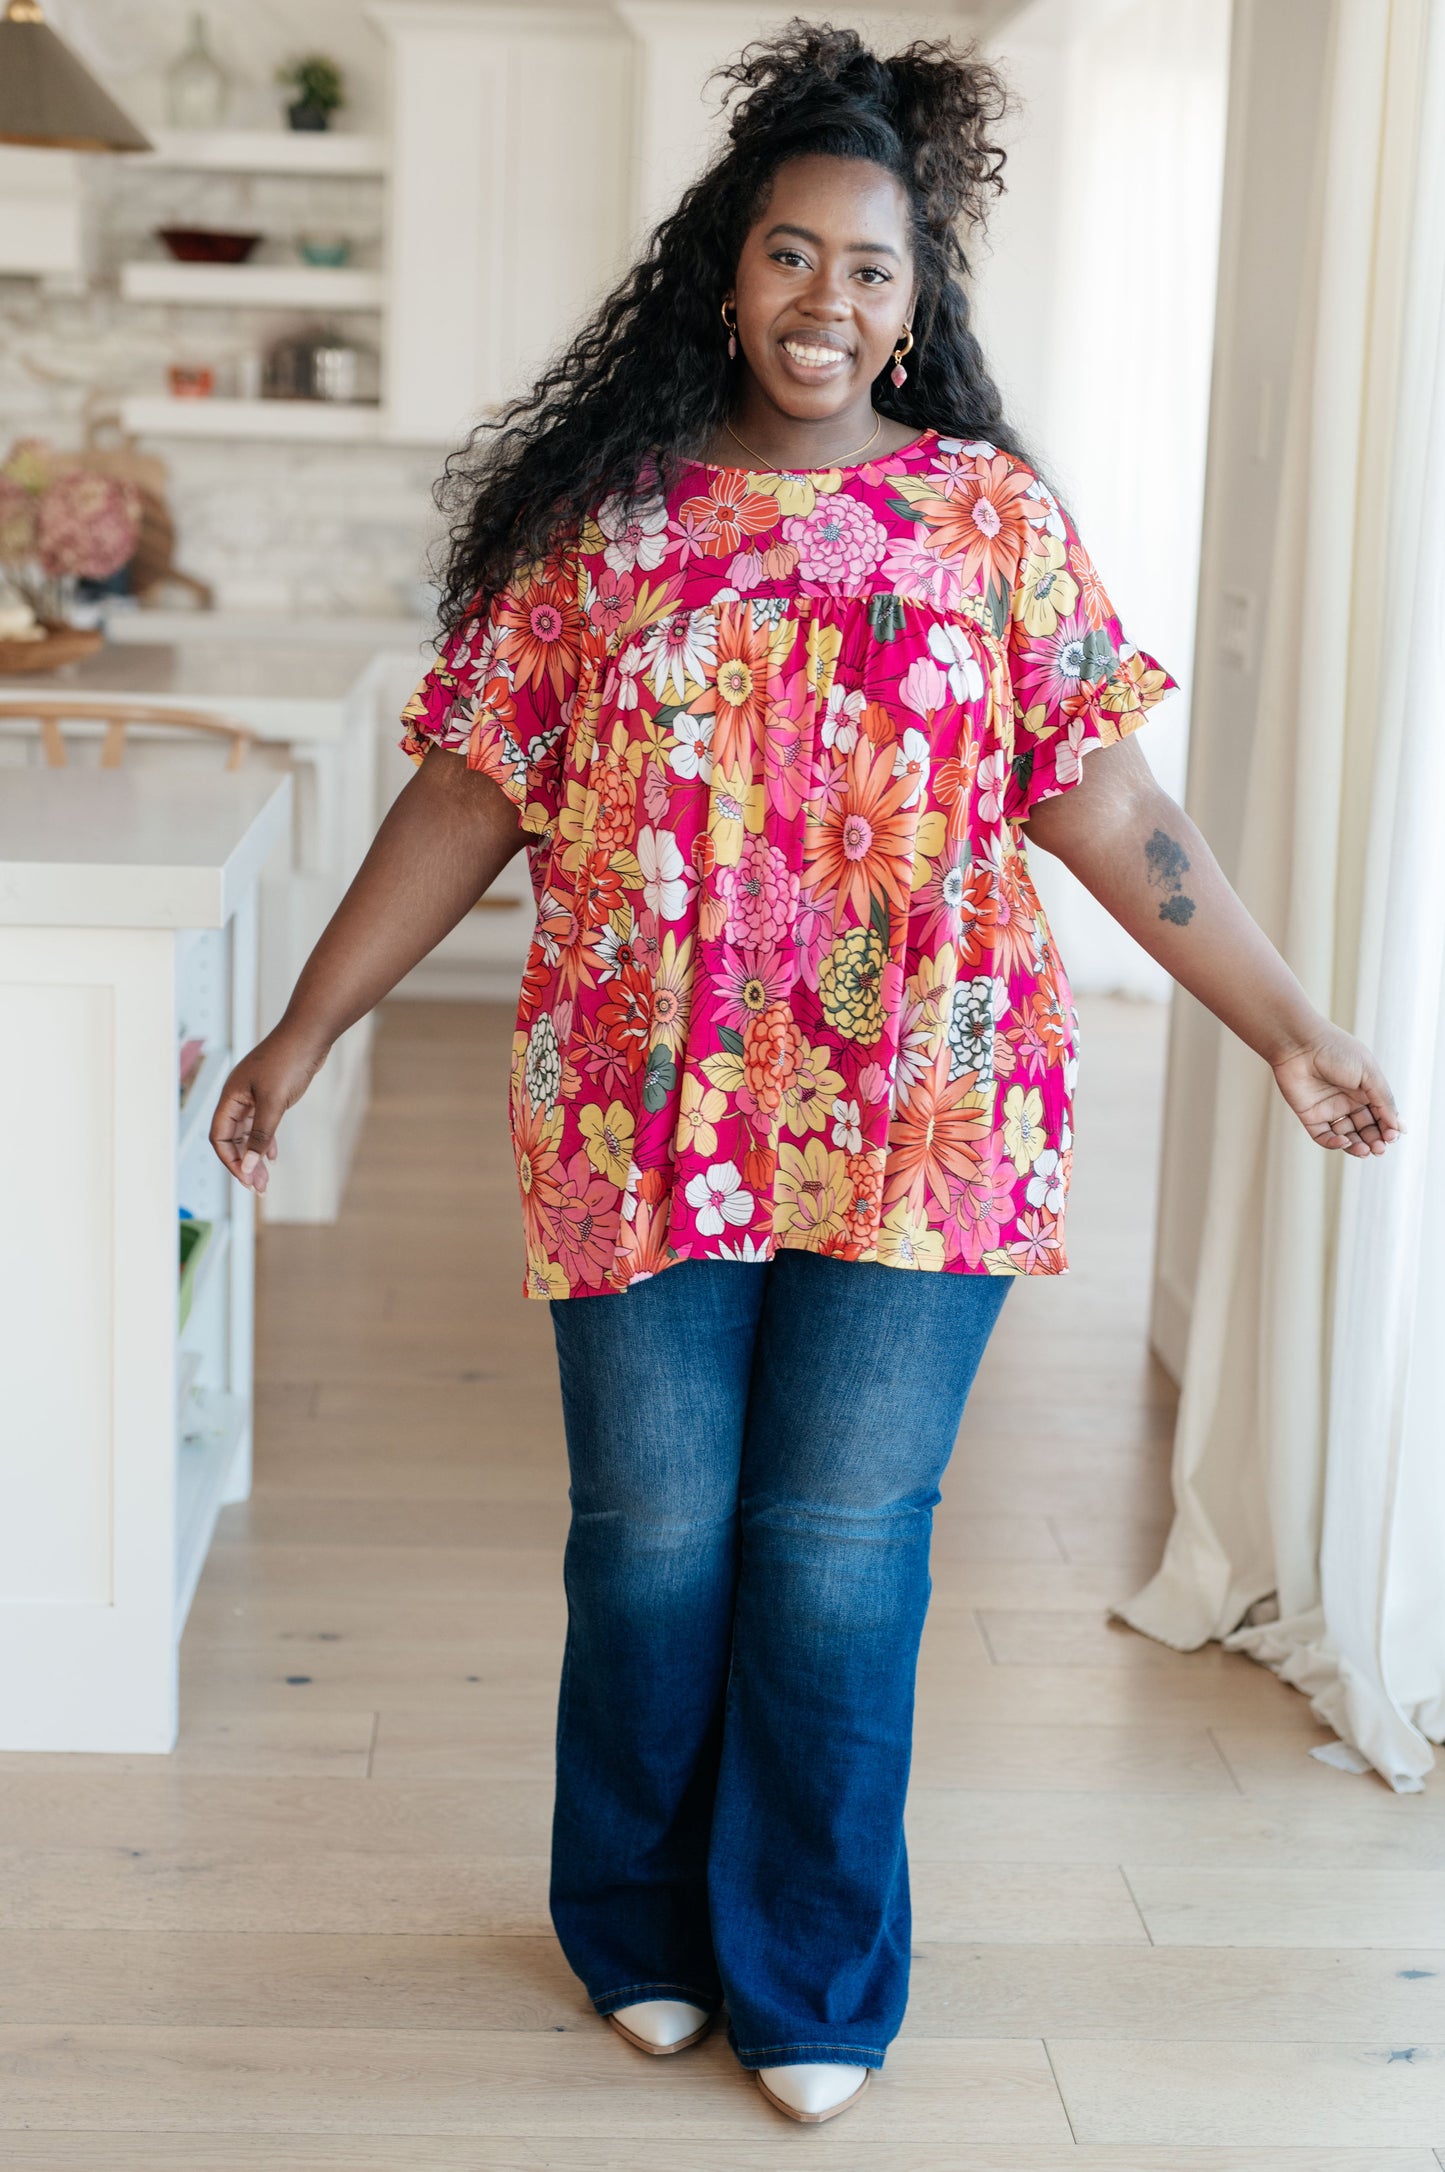 Flit About Floral Top in Rose Red